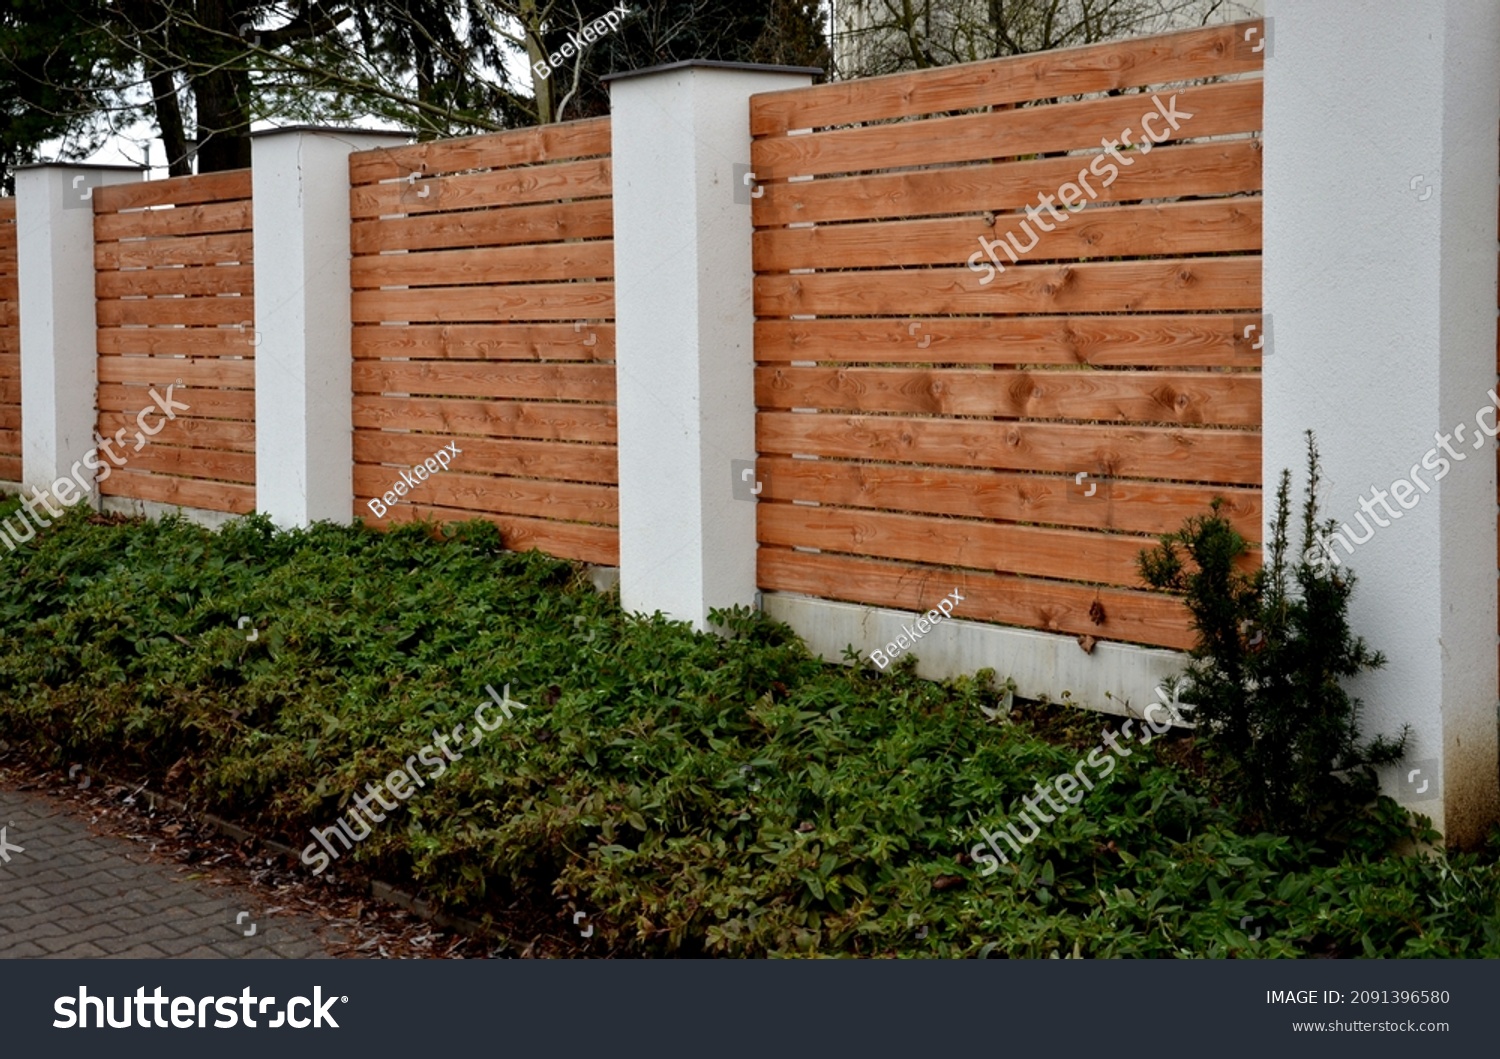 wooden fence made of natural planks. the columns are made of roughly plastered white columns. full fencing made of horizontally placed boards. adjacent to the land is a bed of shrubs #2091396580